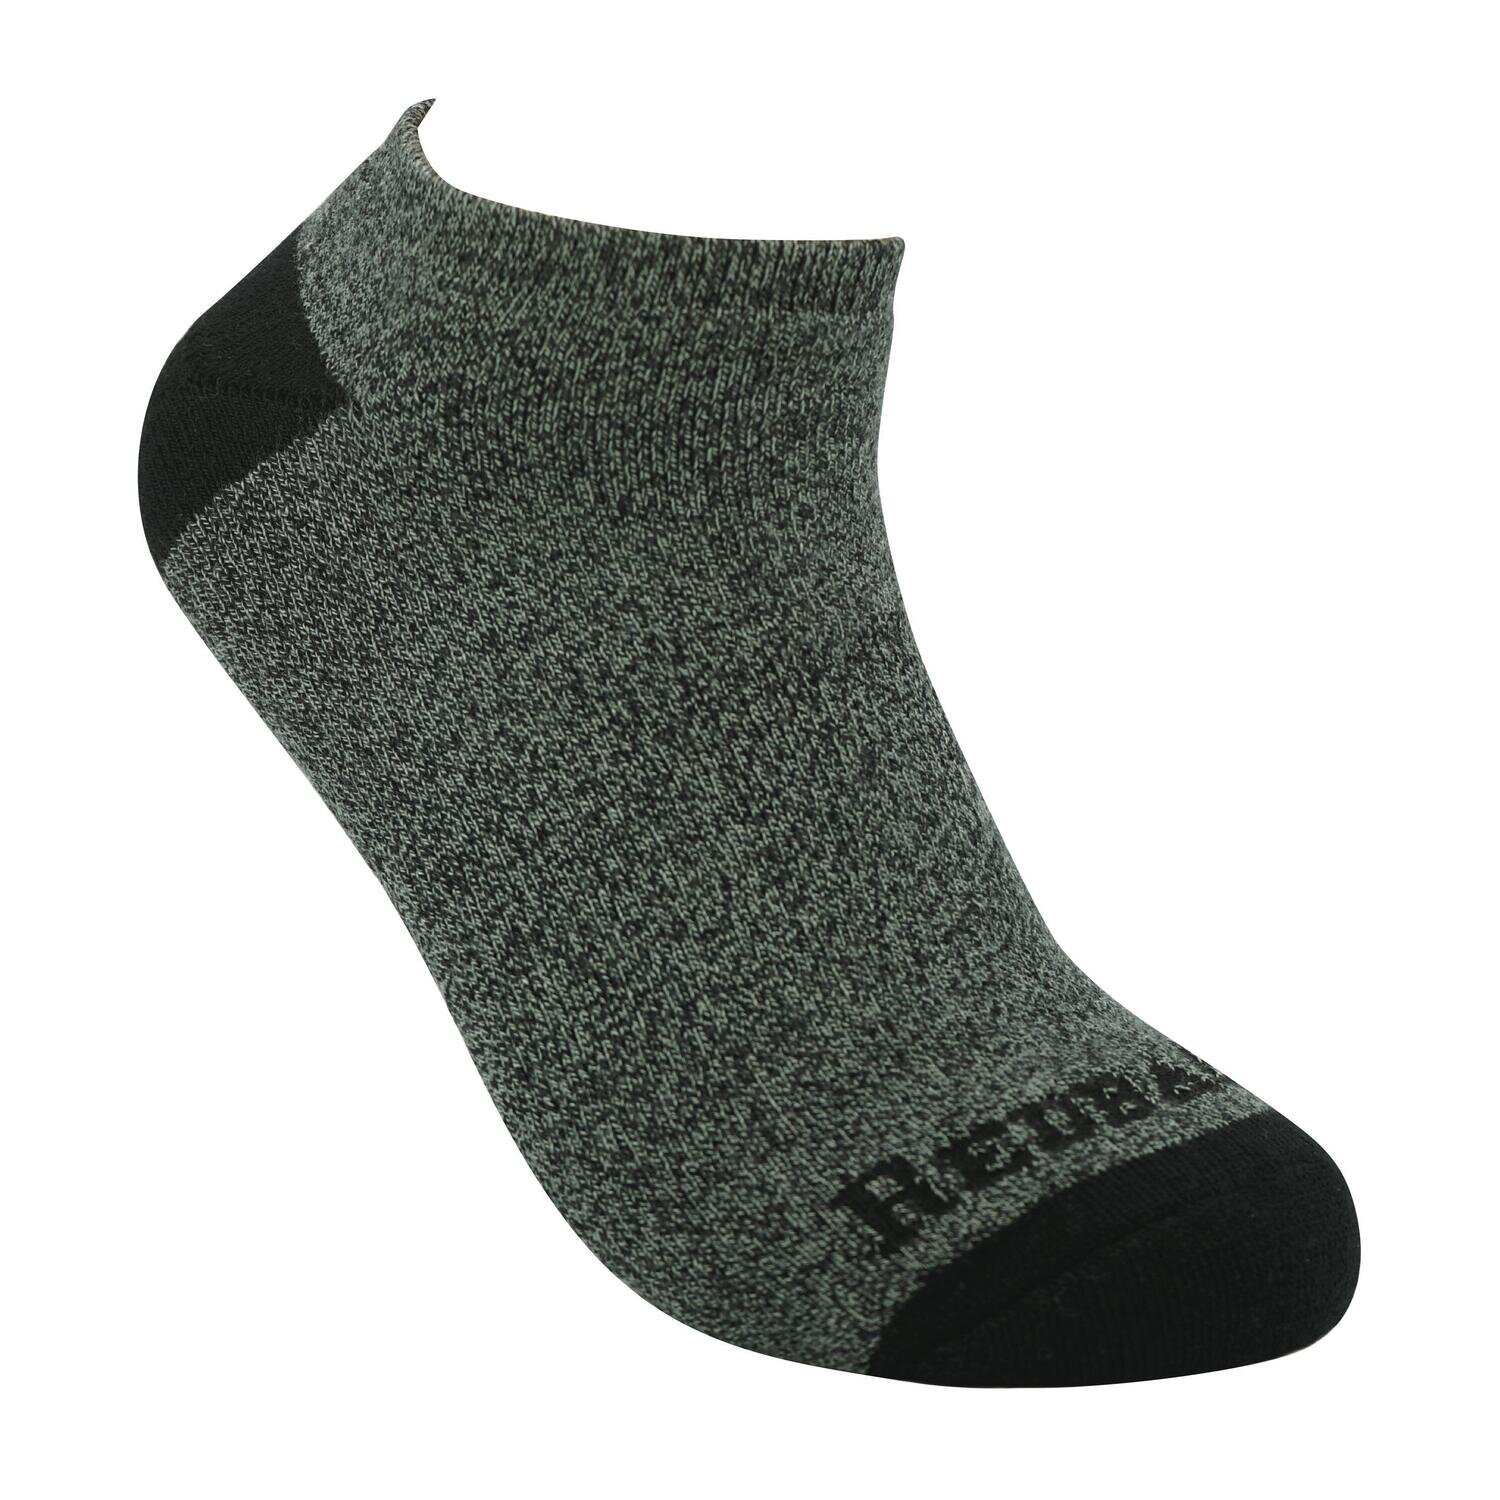 RBBBAMLS - Bamboo No Show Sock, Heather Gray (6-Pack)